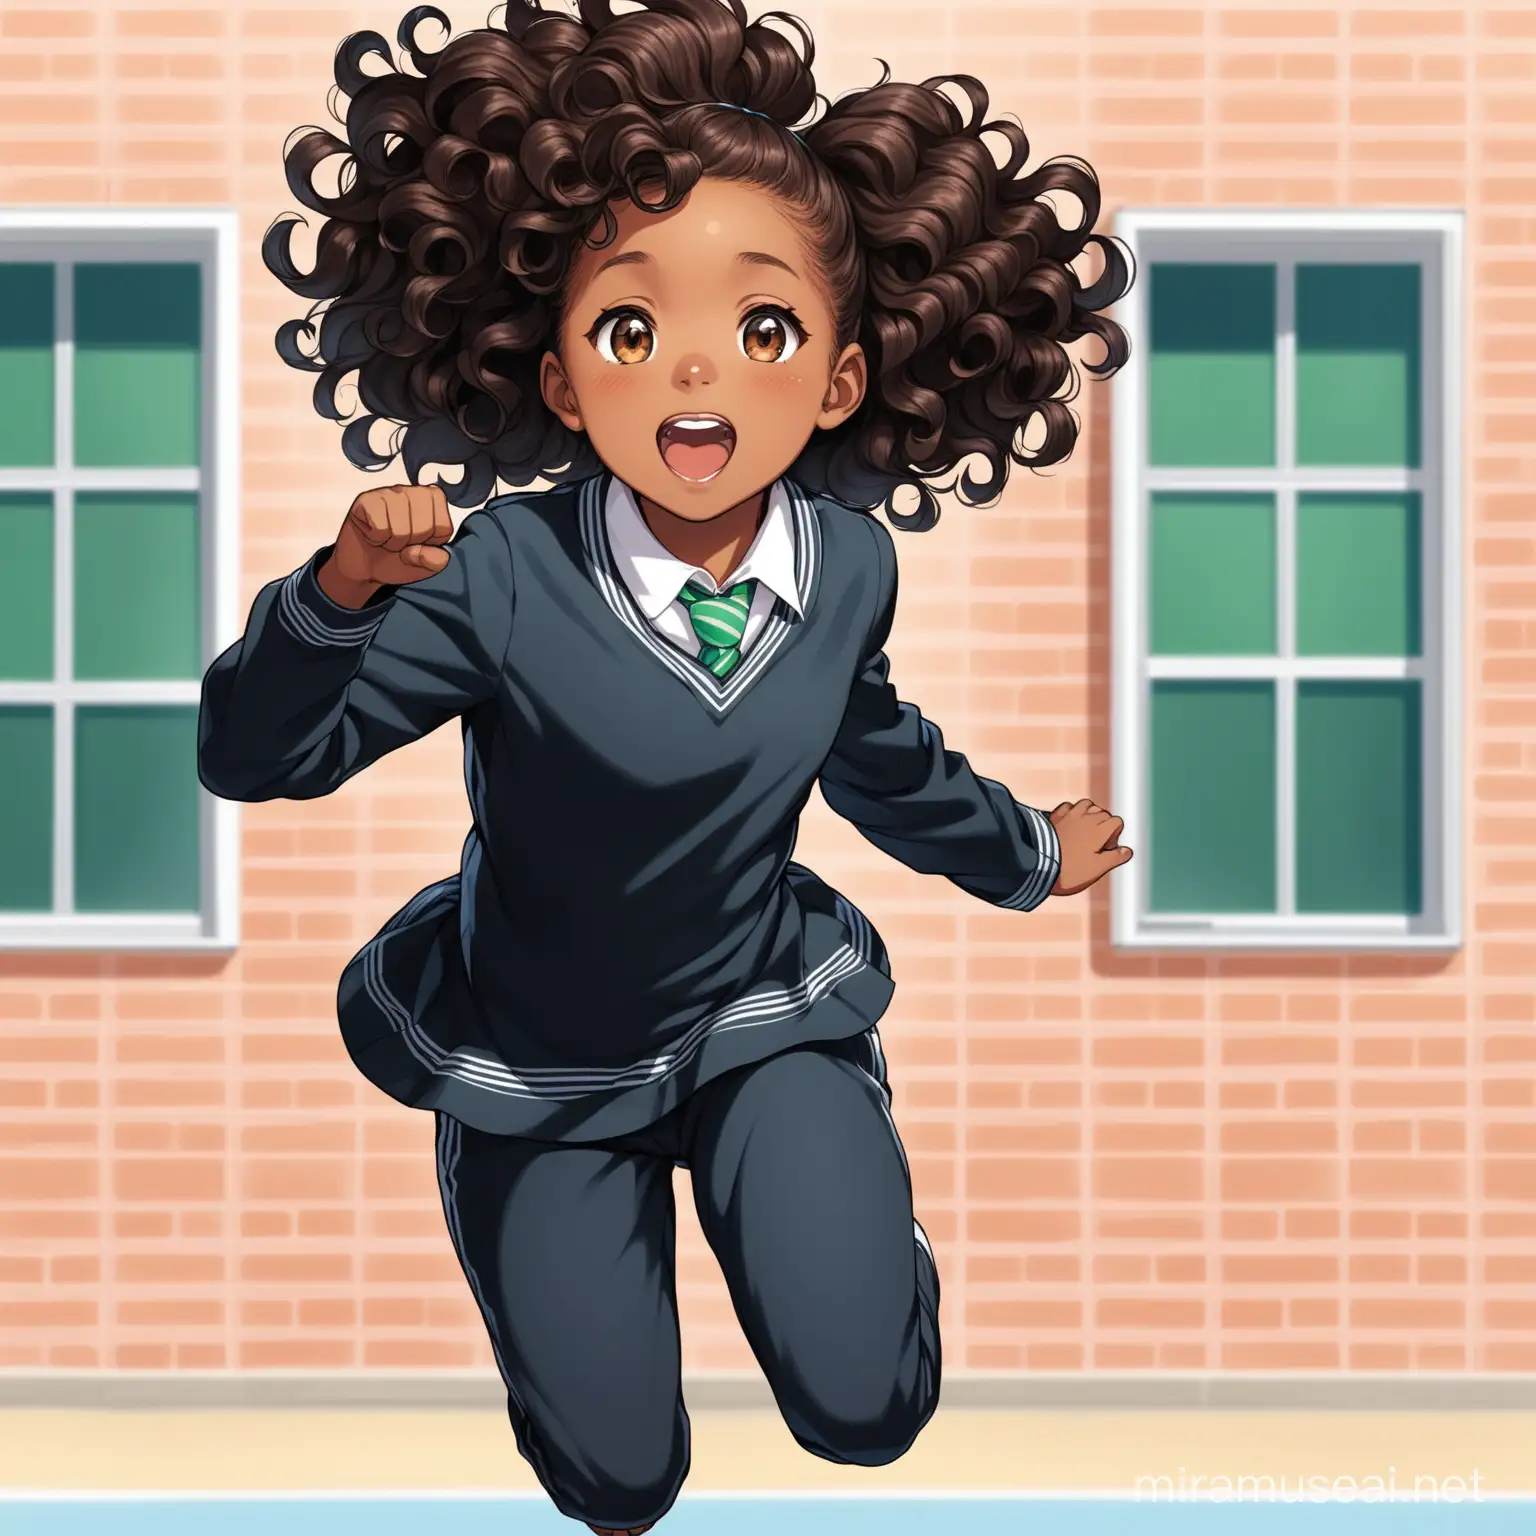 a 9 year old black girl with curly hair jumping up and own in front of a school building